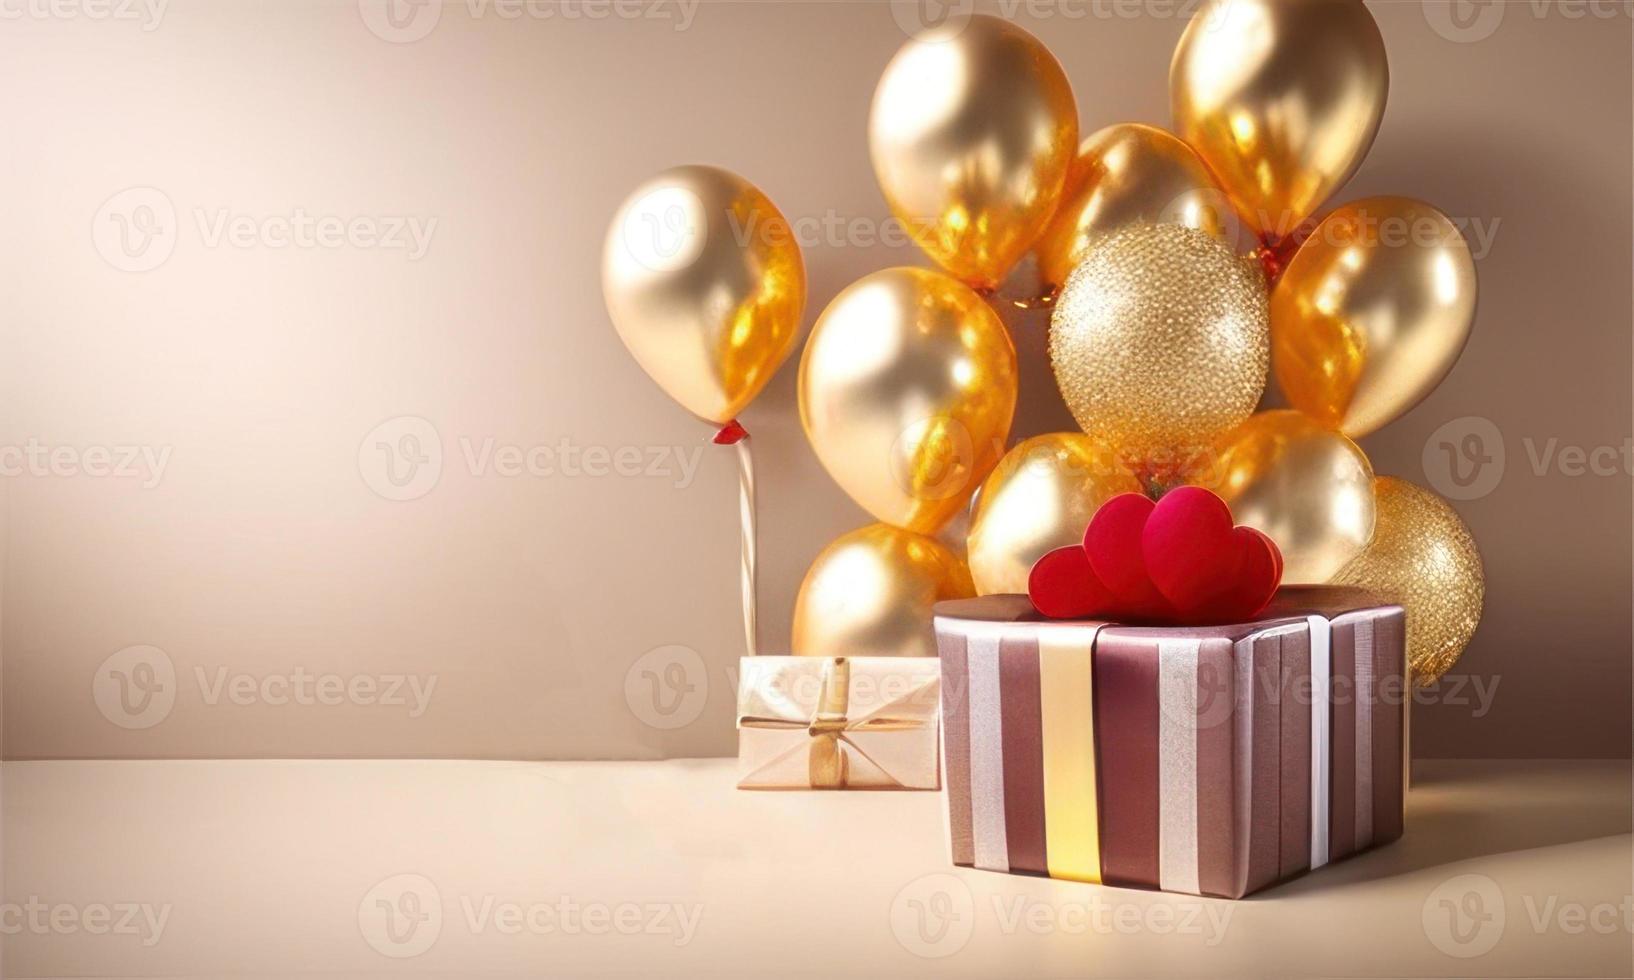 gold balloons and gift photo